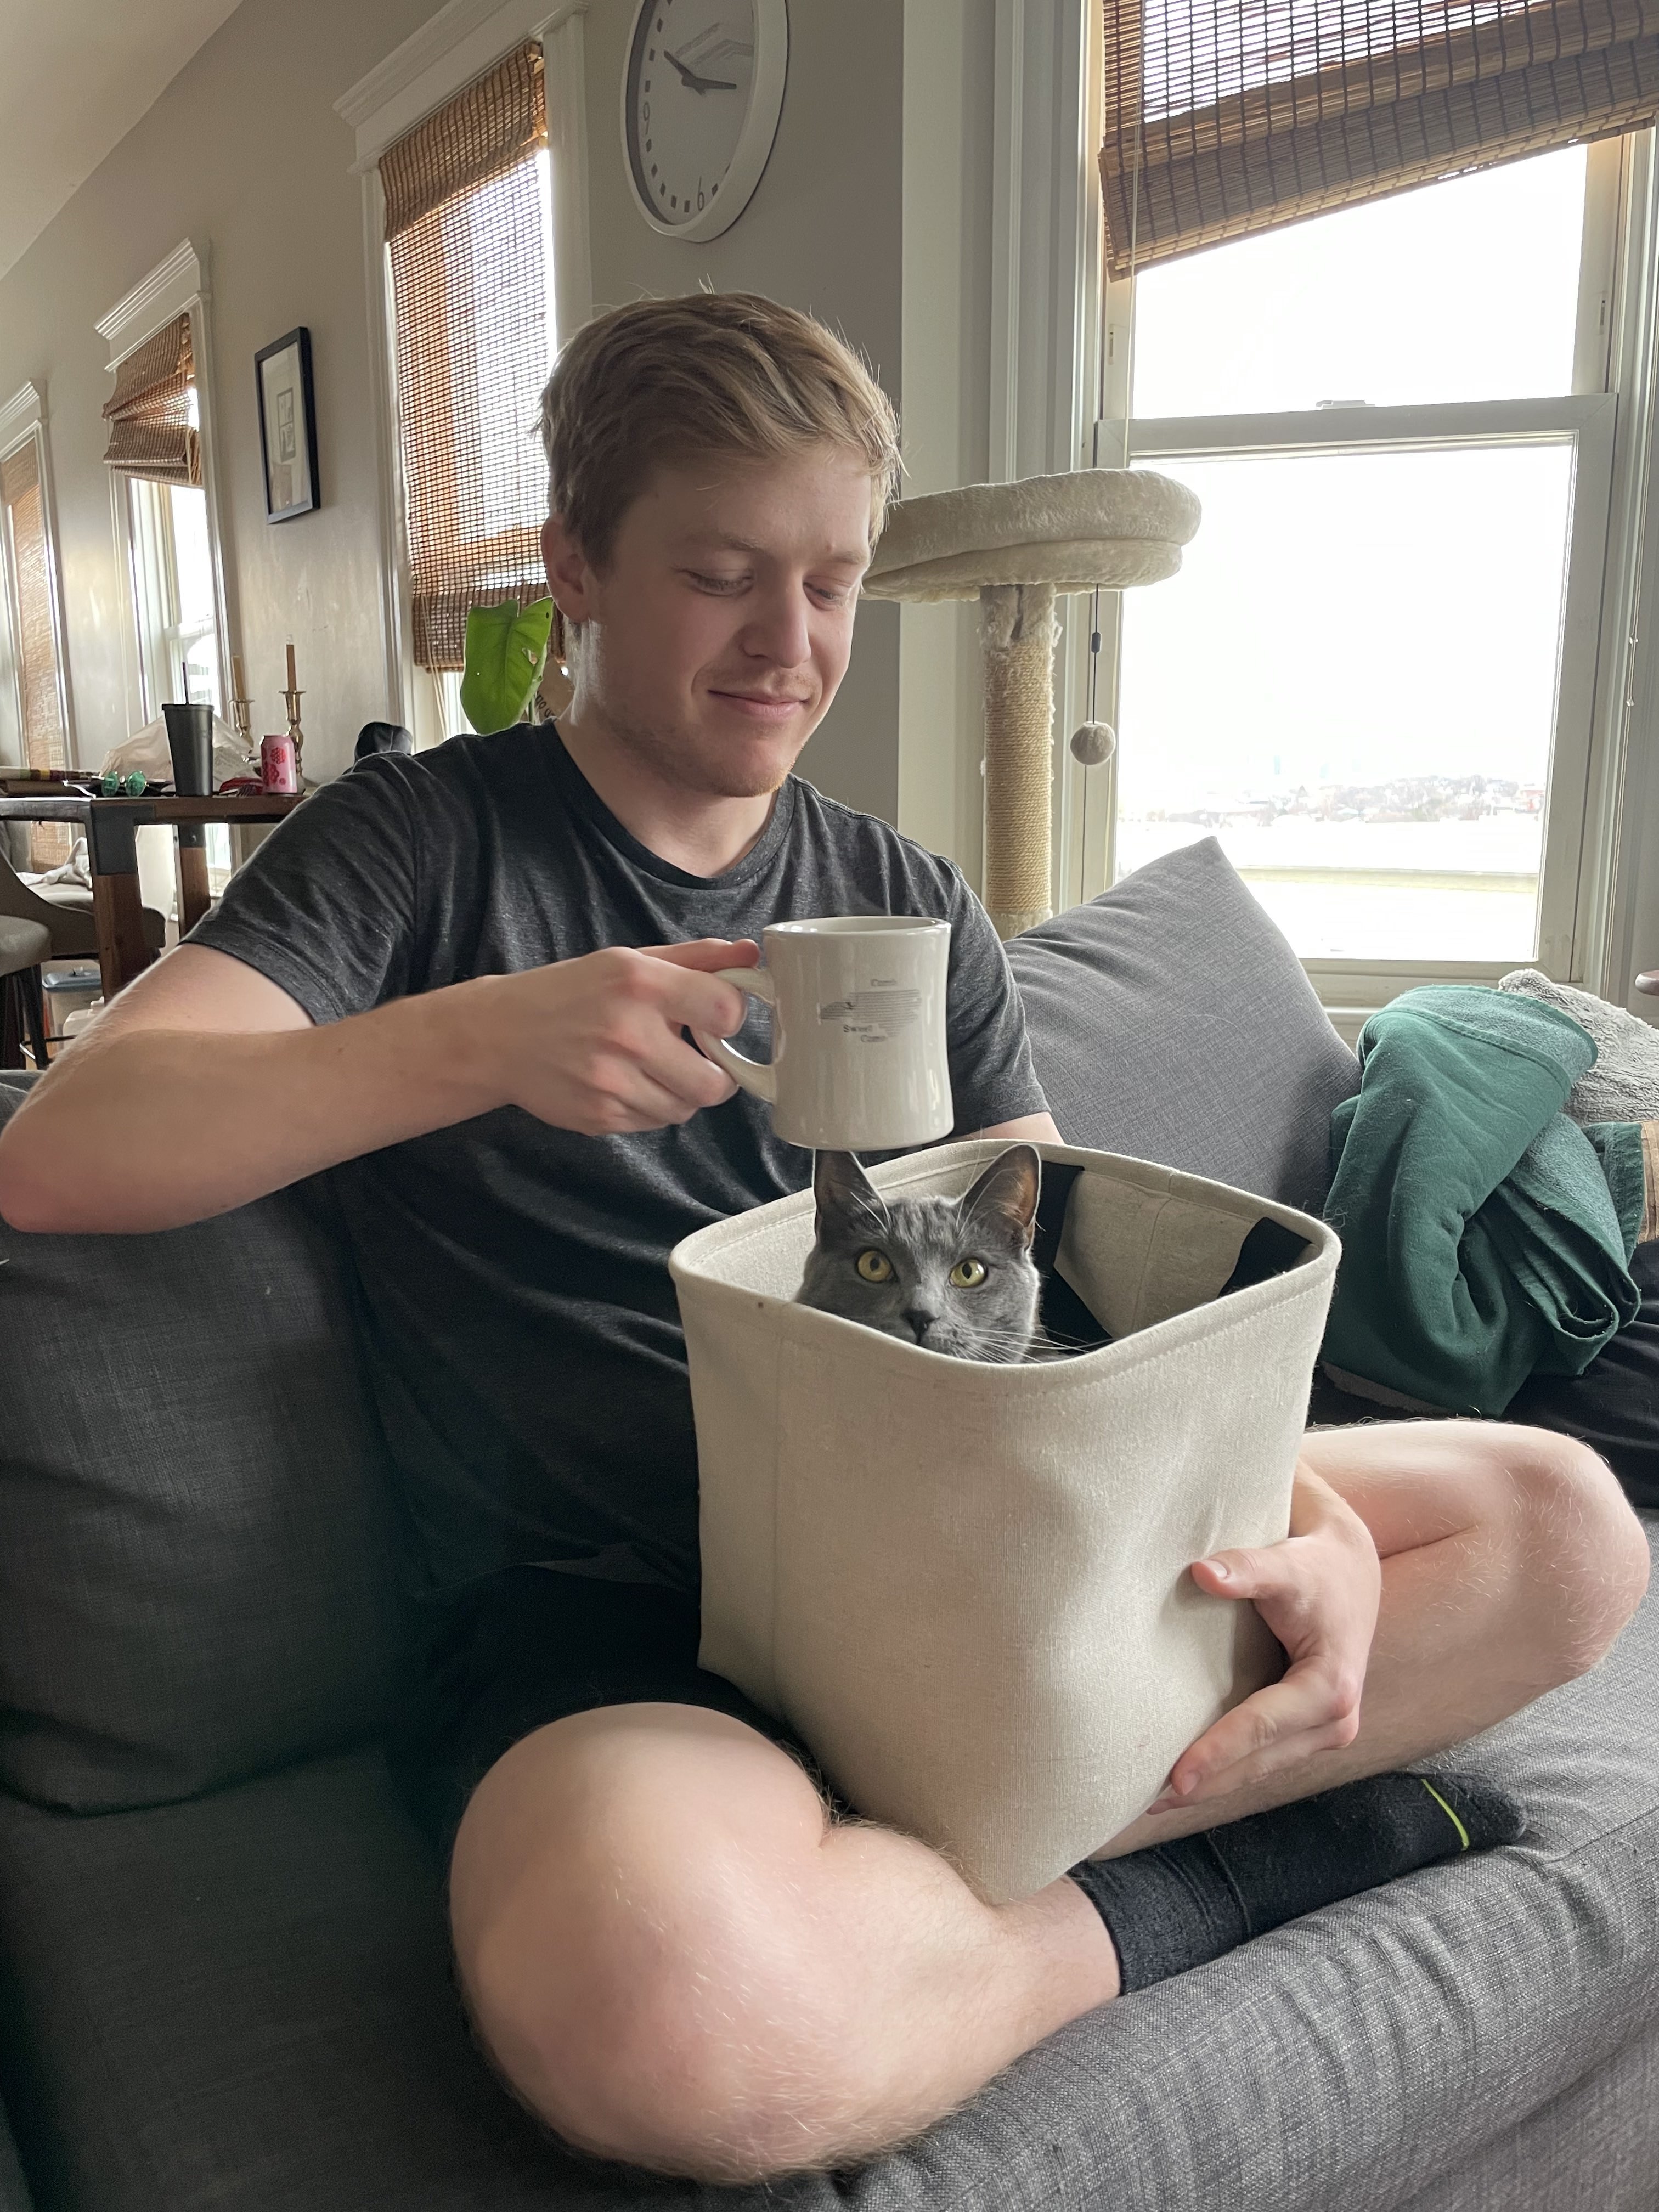 A picture of me holding a cat and a mug of coffee